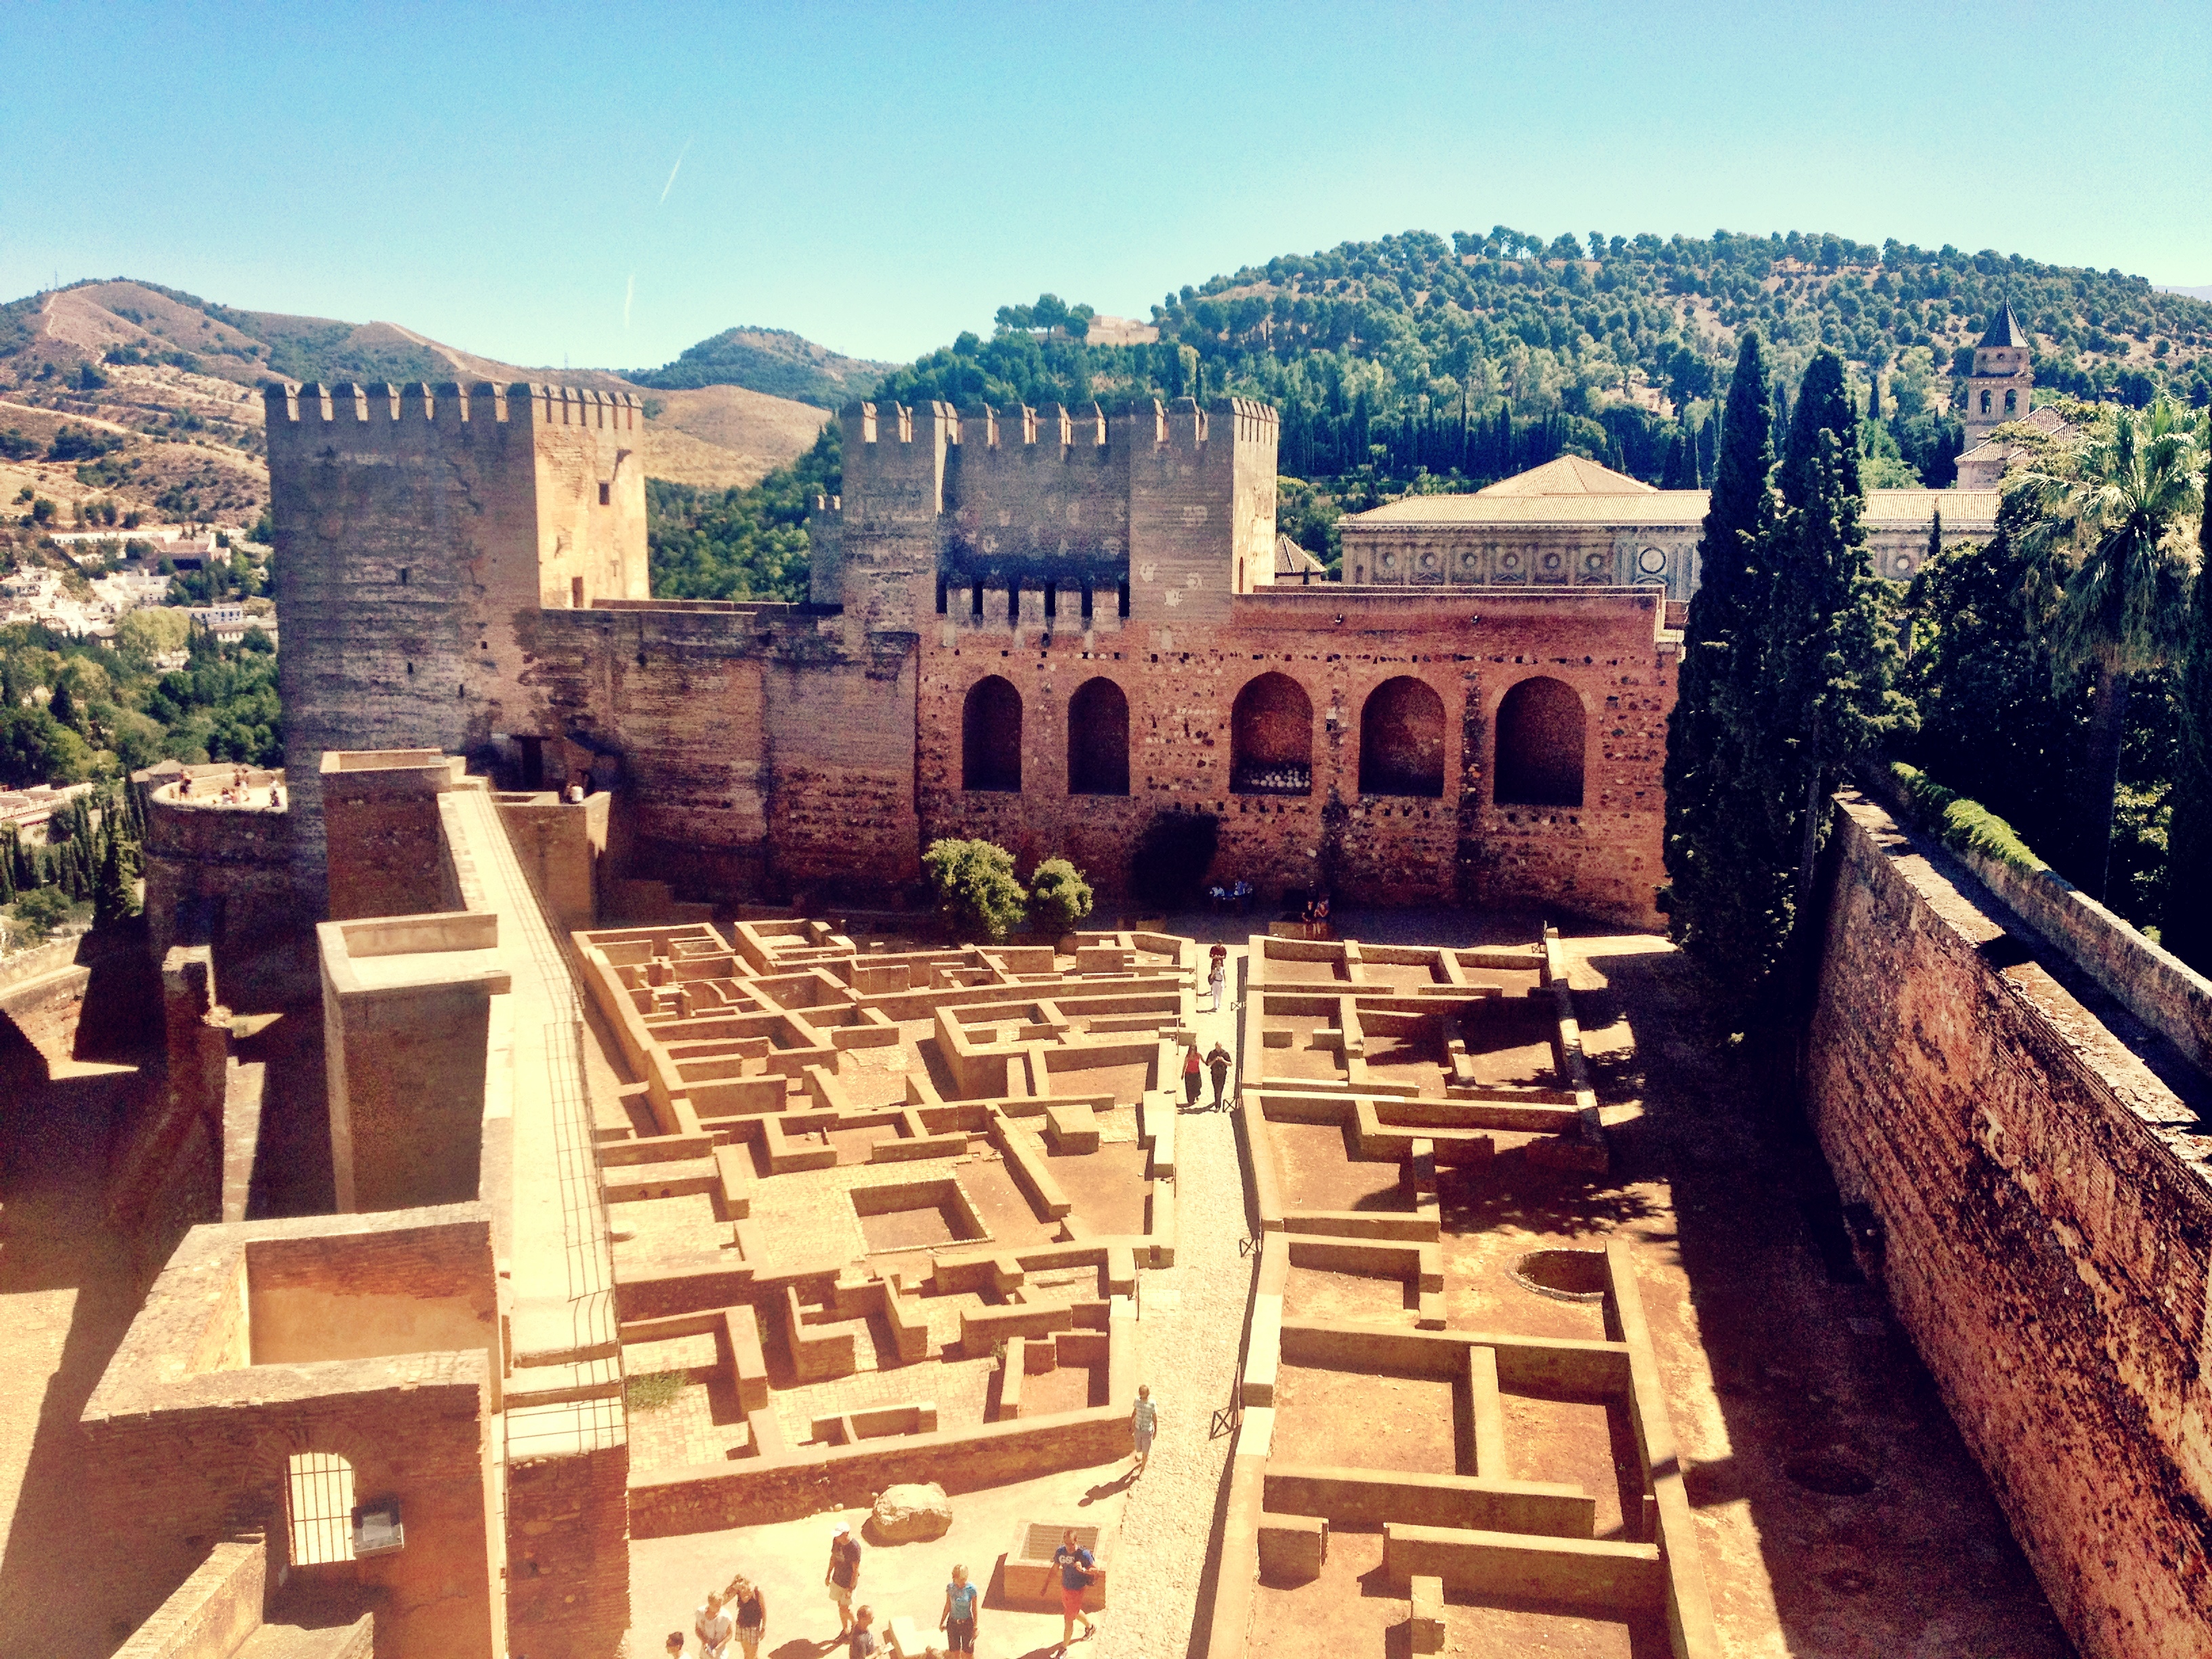 Postcards from the Alhambra